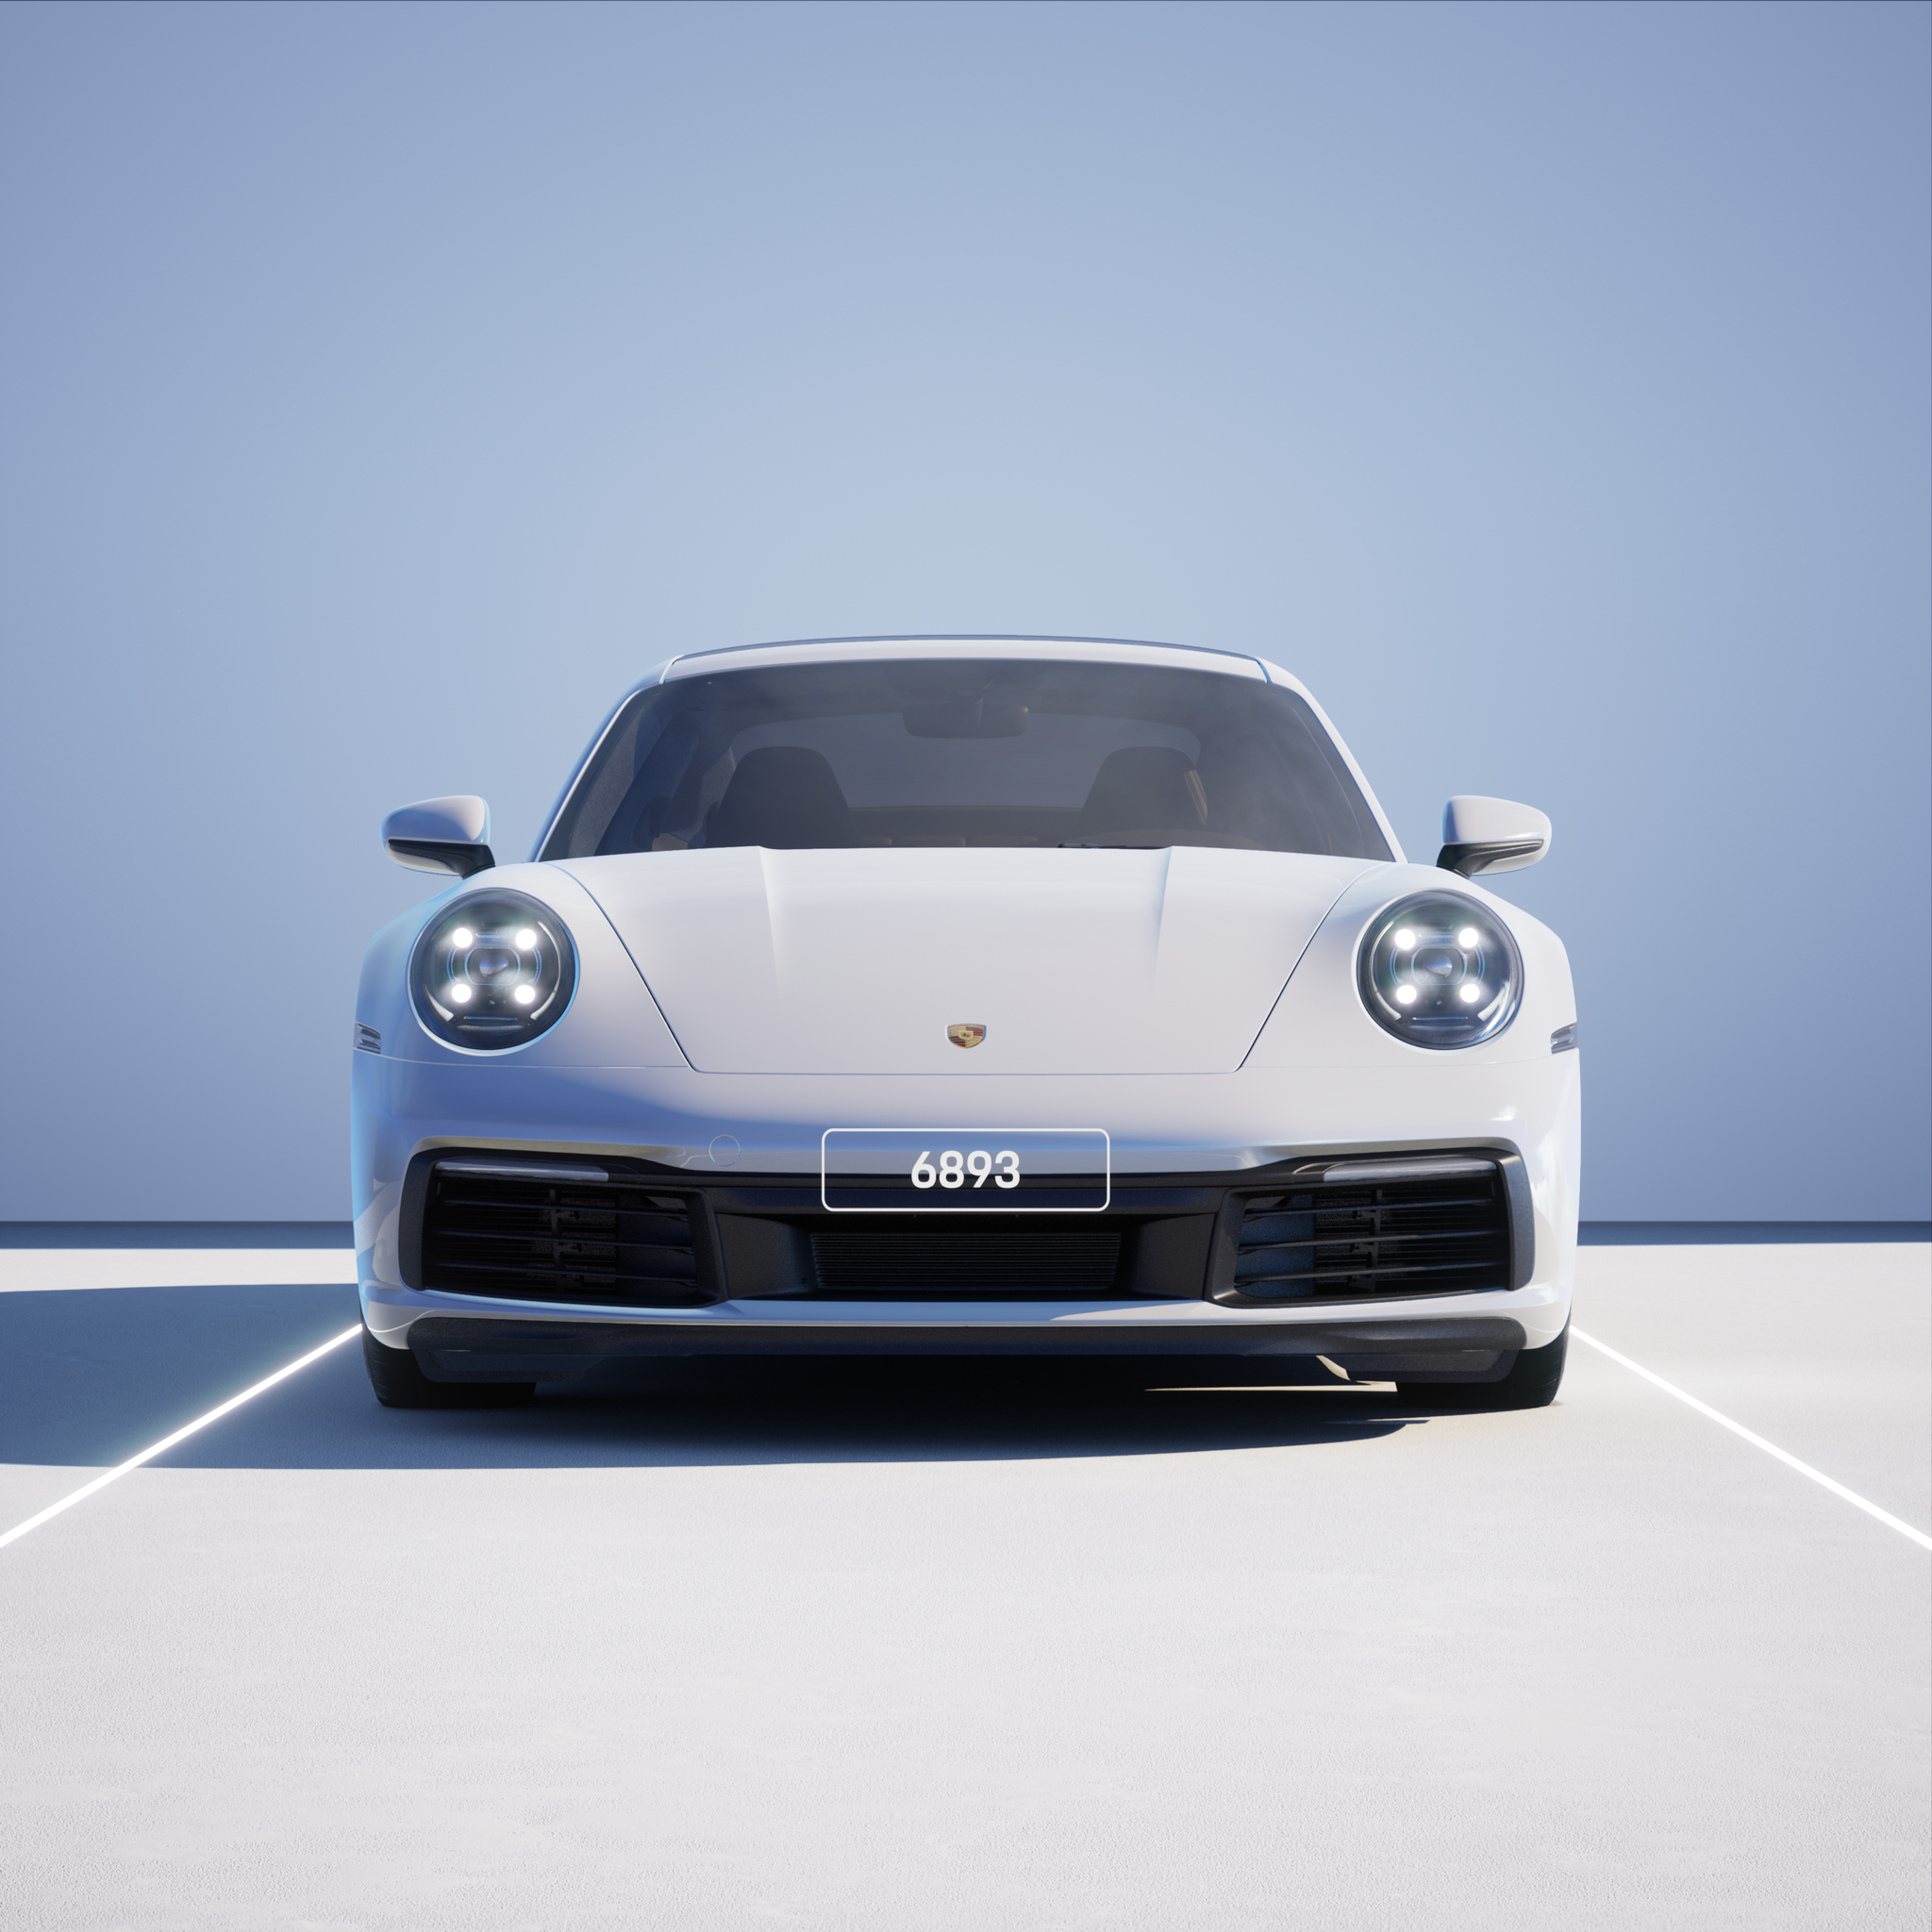 The PORSCHΞ 911 6893 image in phase